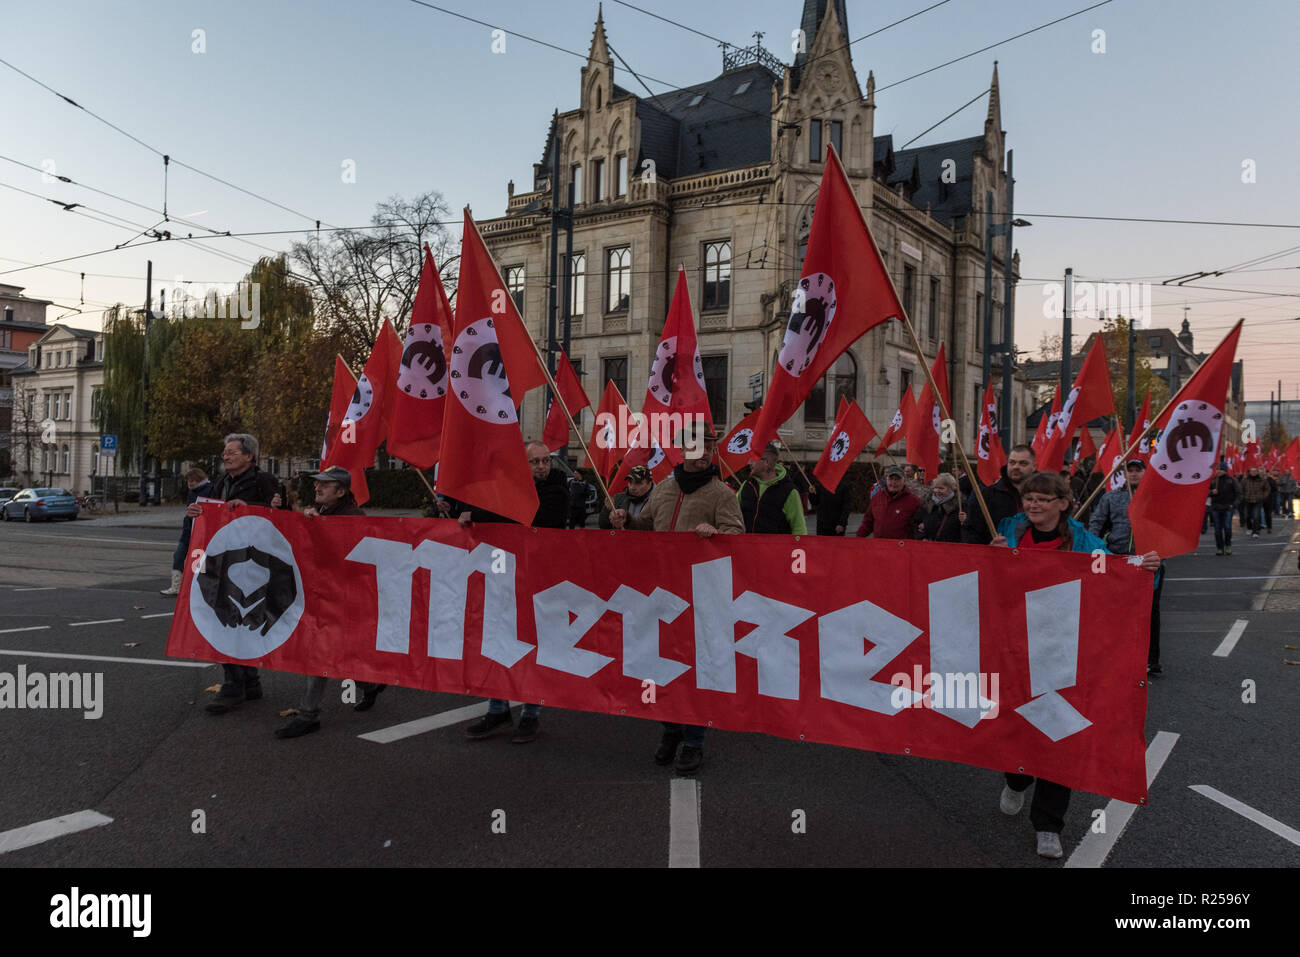 Counter protesters seen holding a Merkel banner during the right wing protest. Right-wing protests against Merkel's visit to Chemnitz, Deutschland. The Chancellor visited the city and talked to the citizens in a citizens' forum after protests and riots broke out in August after a violent death of a 35-year-old man from Chemnitz. Stock Photo